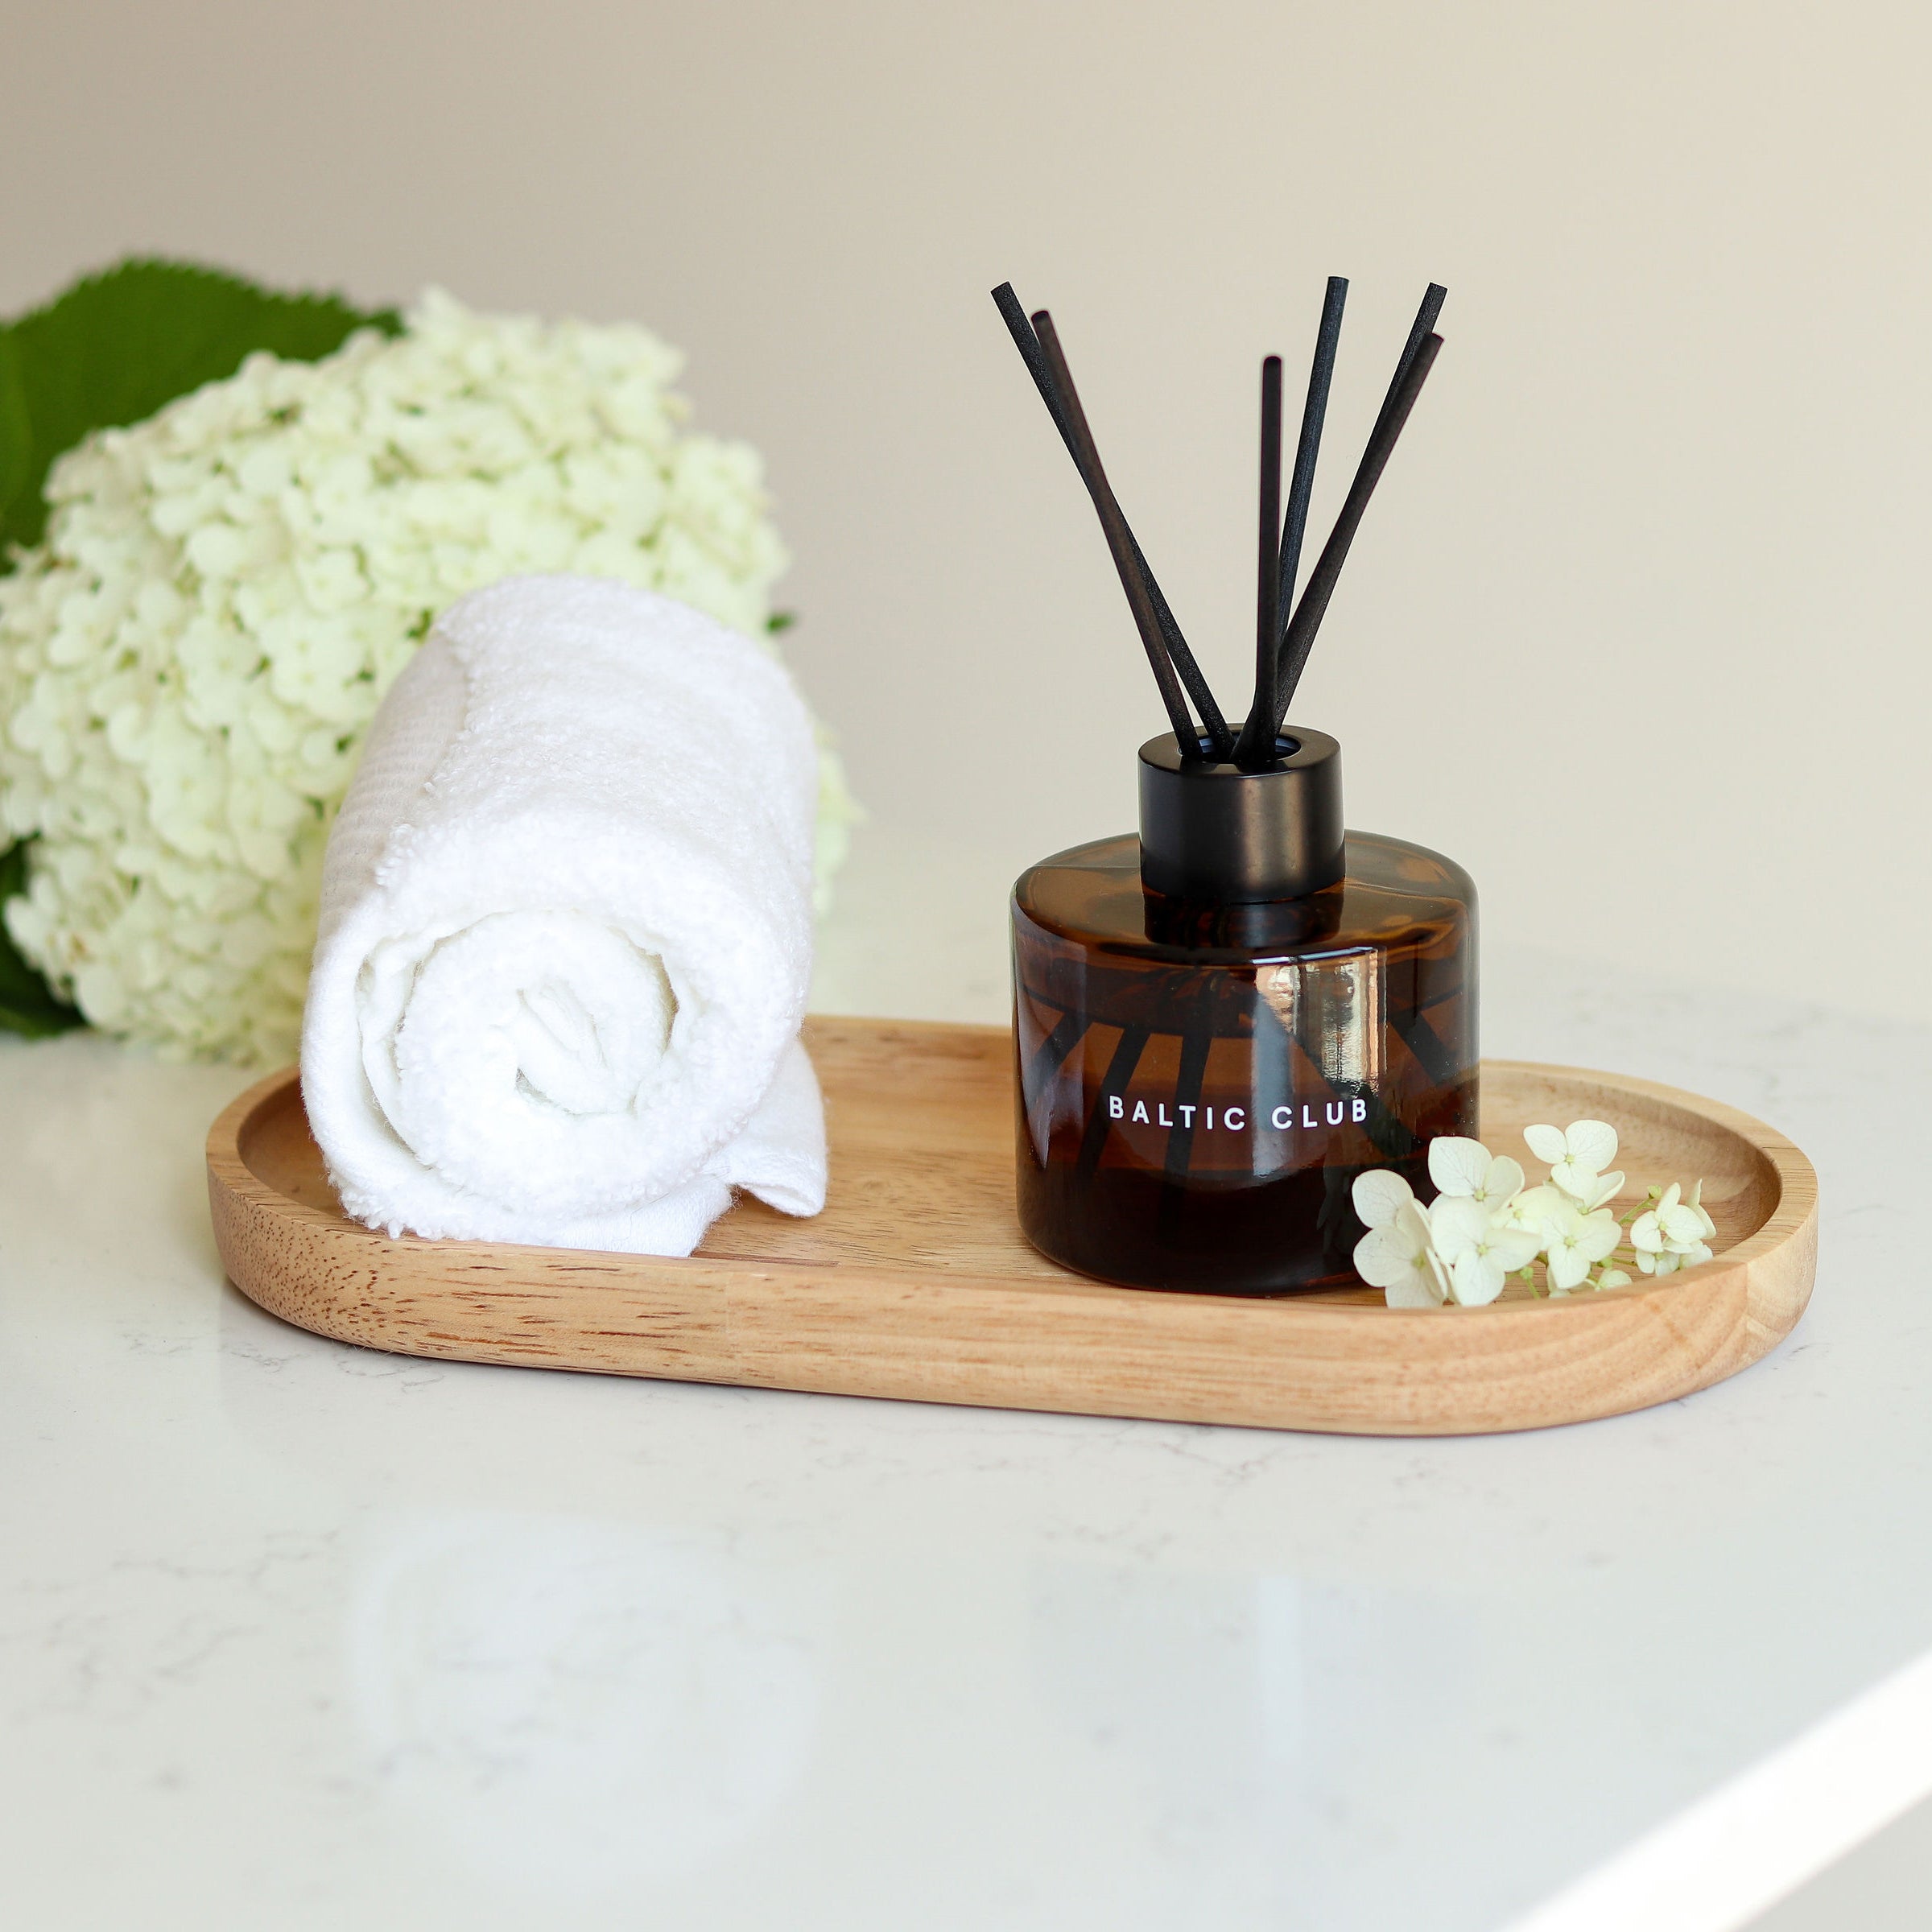 Northern Breeze Reed diffuser